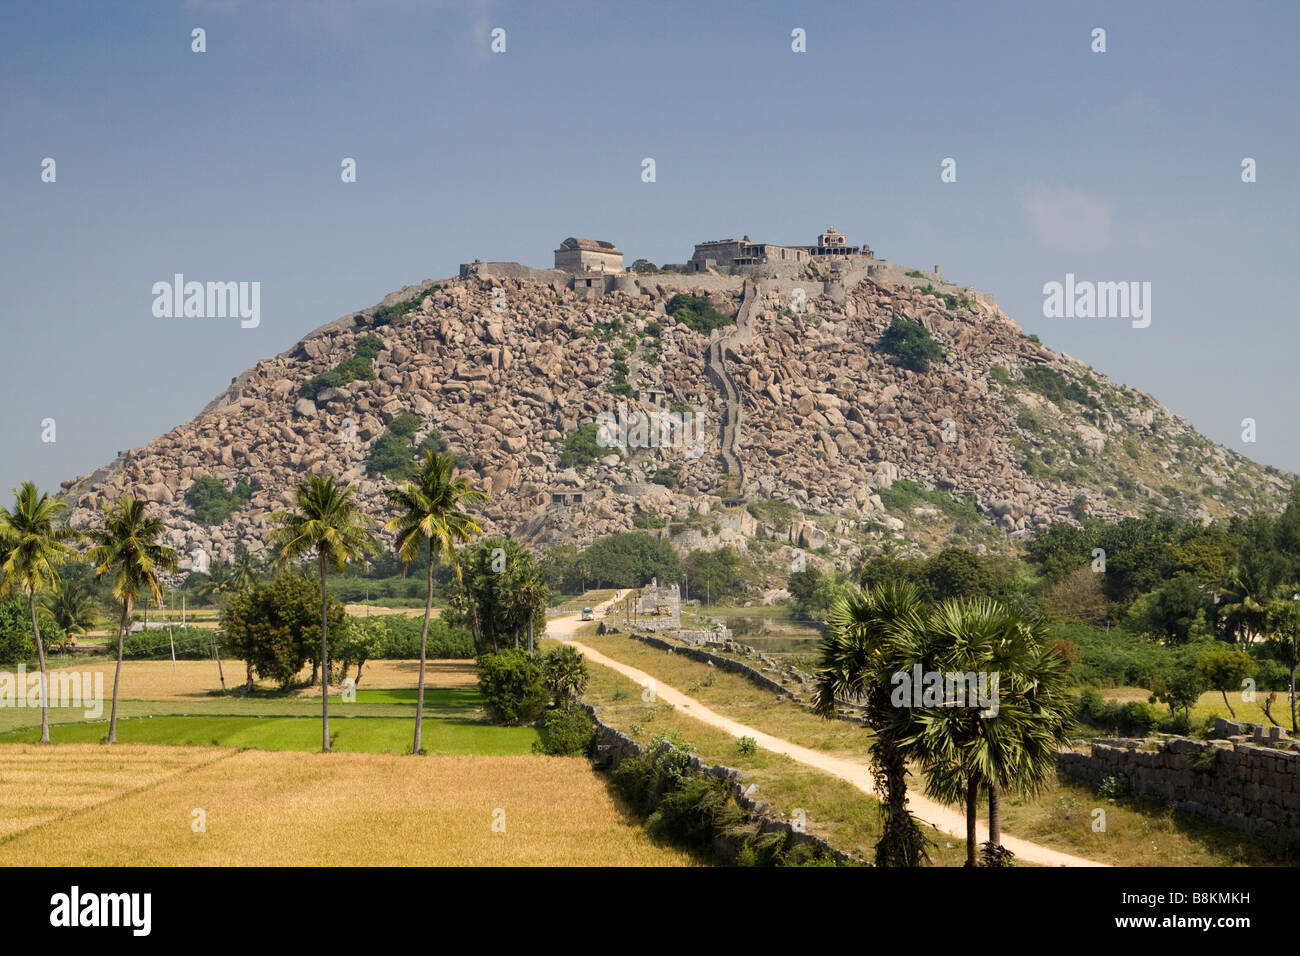 India Tamil Nadu Gingee Fort Krishnagiri hilltop fort from walls and moat Stock Photo